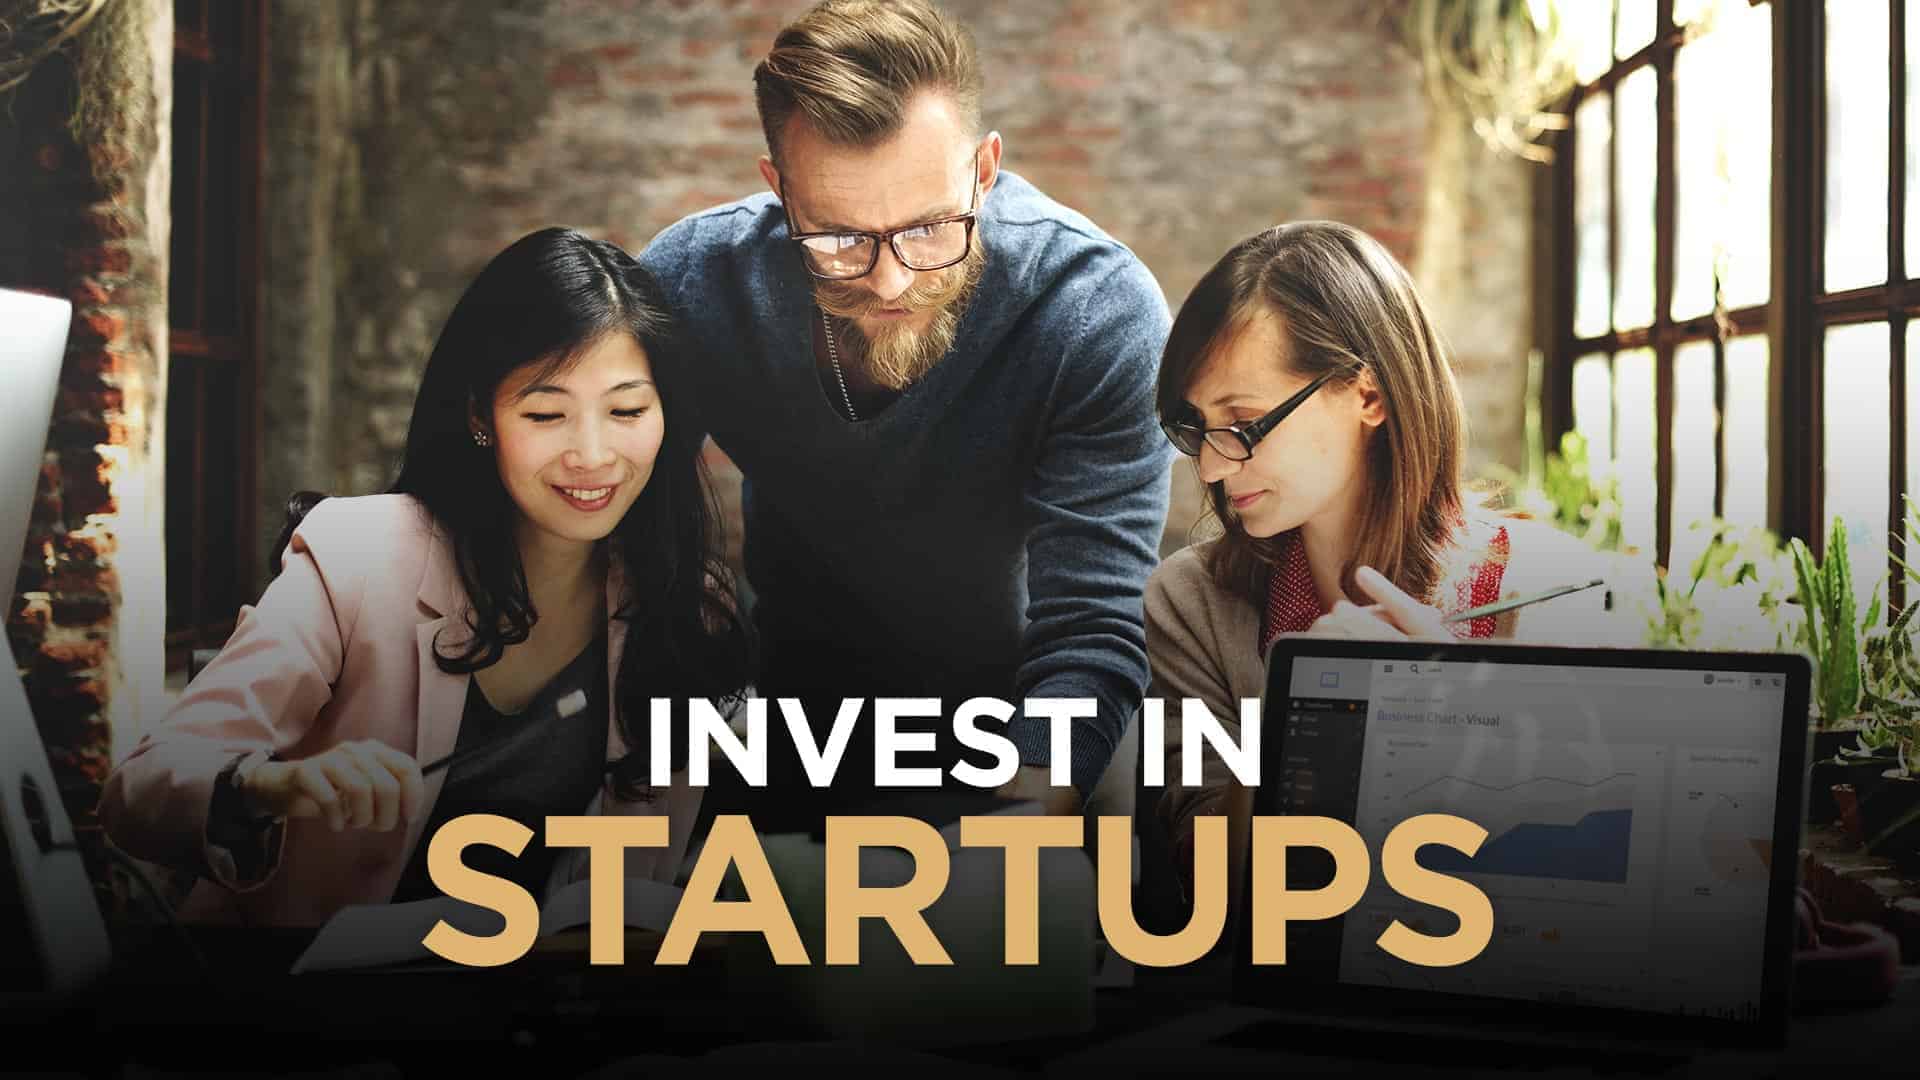 5-Crucial-Things-To-Look-For-Before-You-Invest-In-Startups